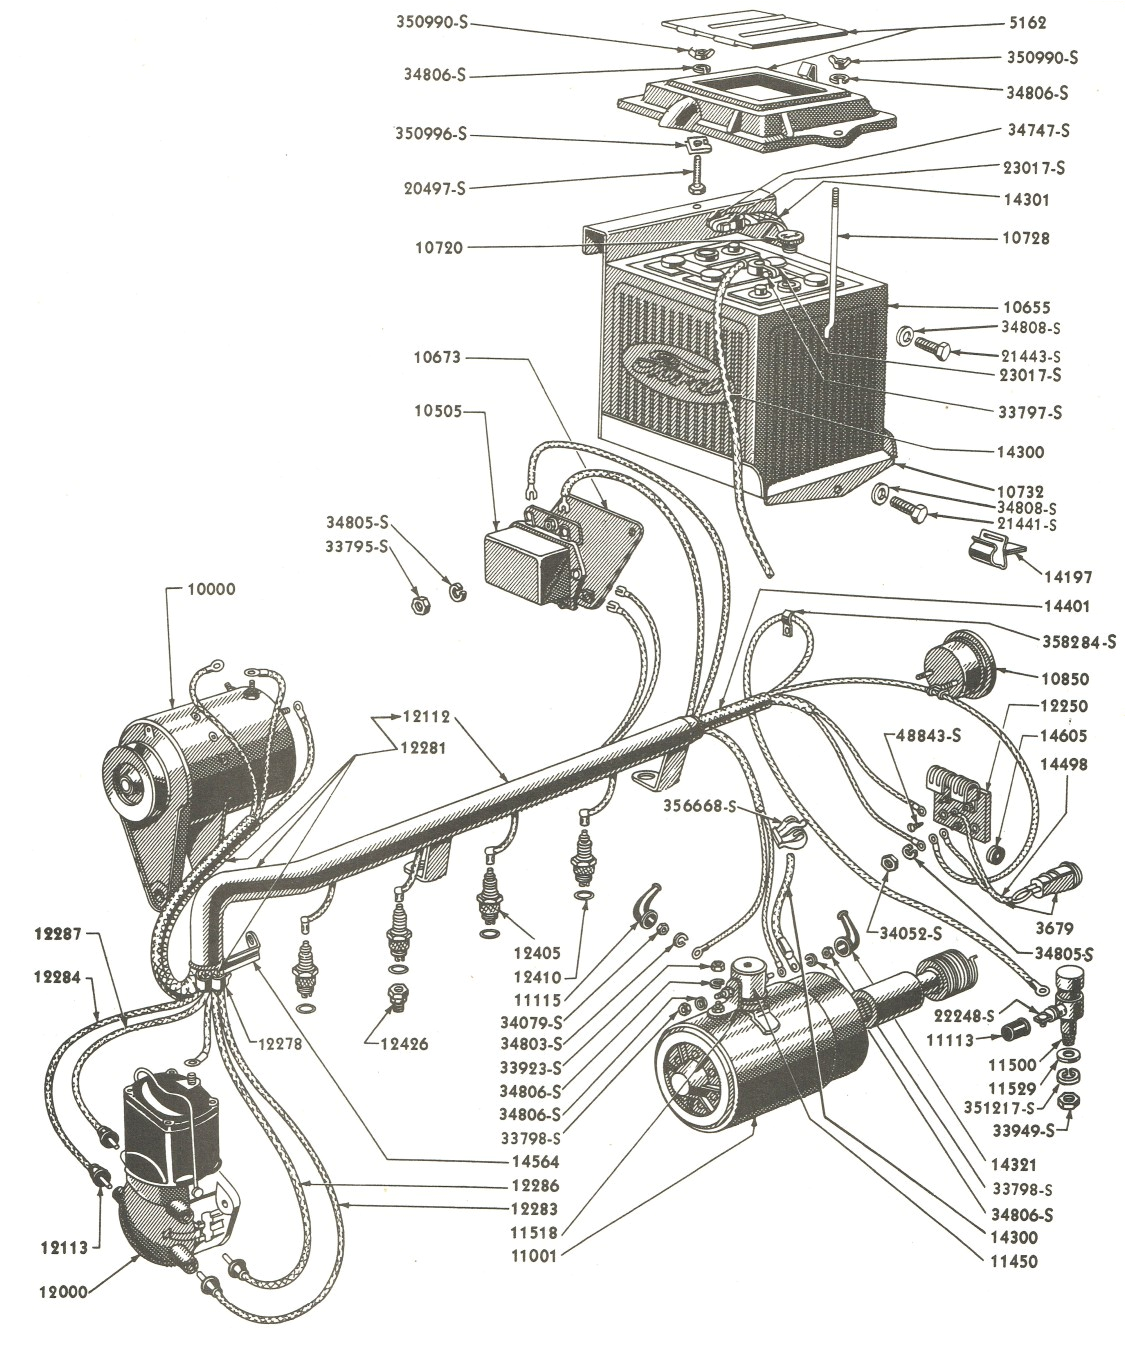 ford 2000 tractor wiring harness wiring diagram operations 1968 ford tractor 2000 wiring harness